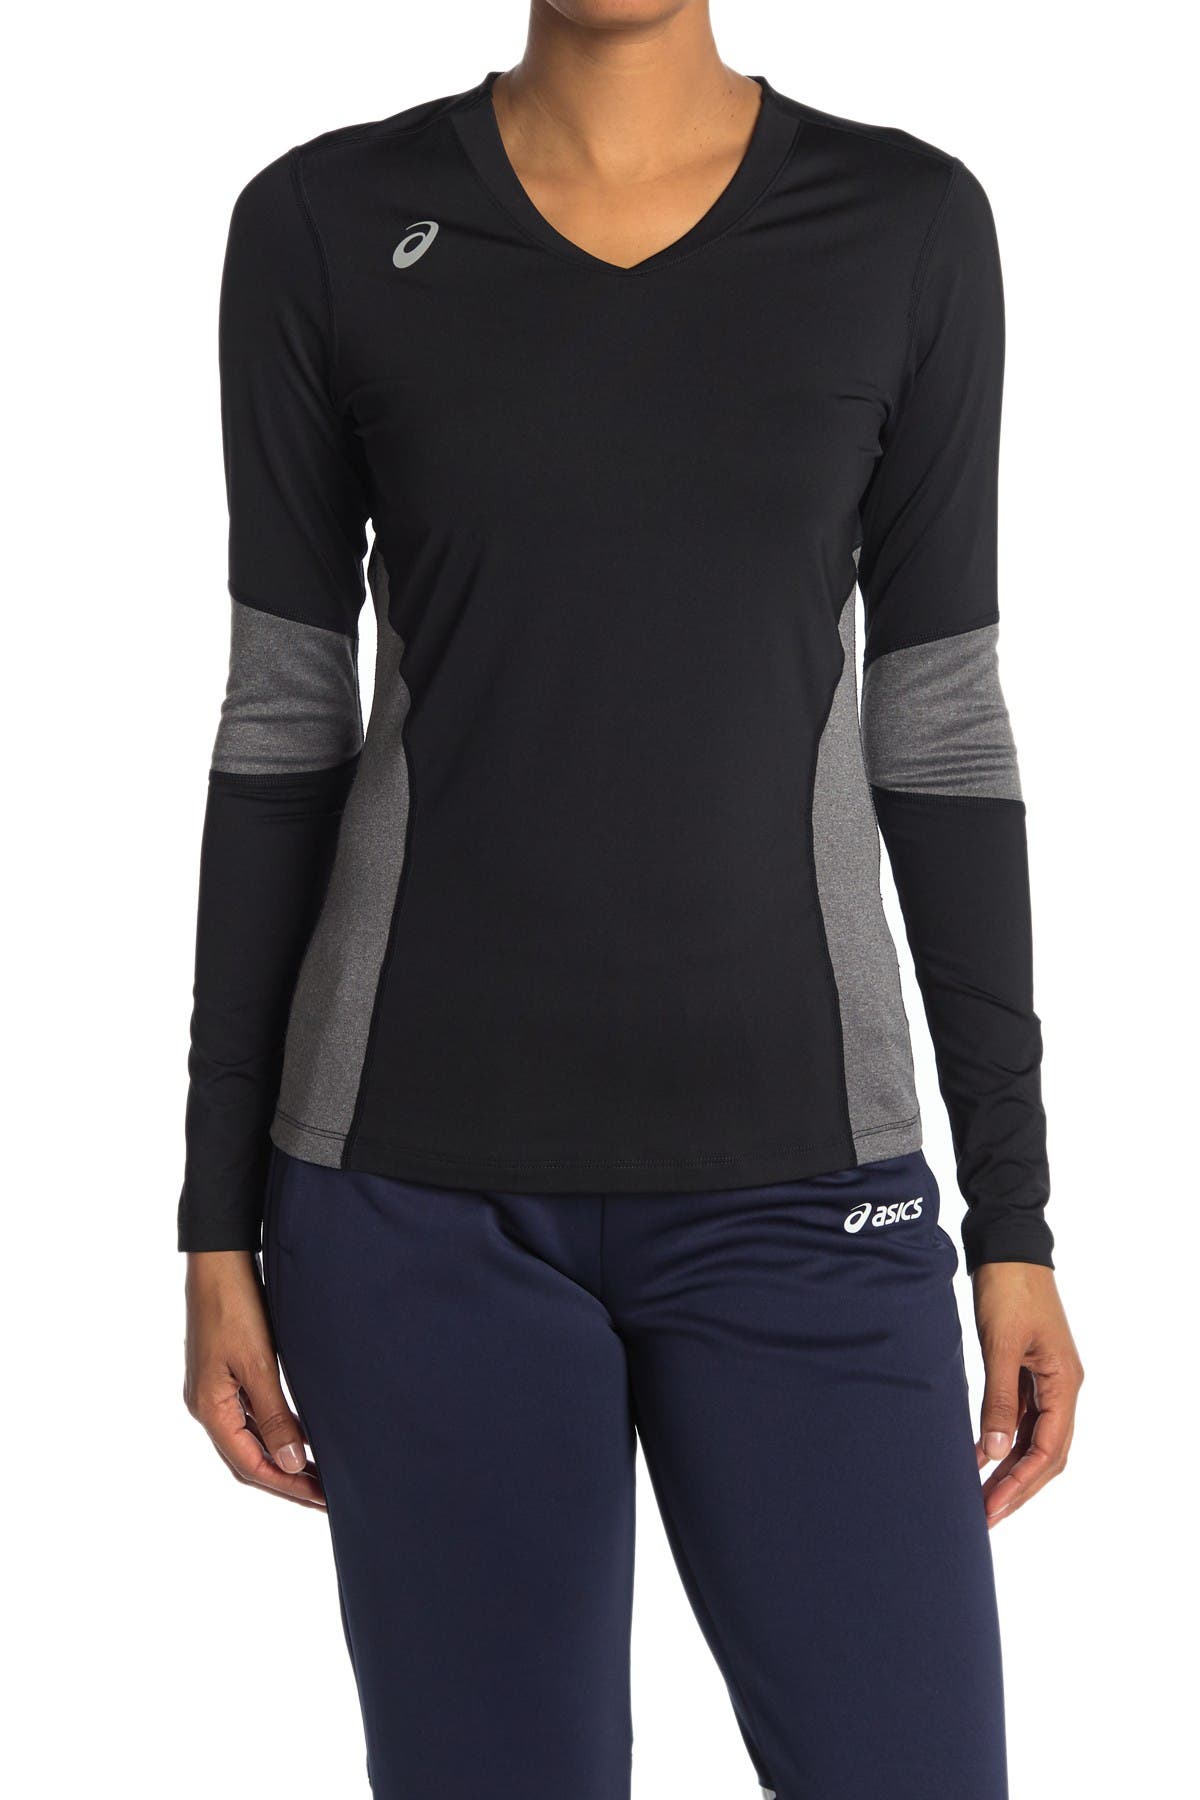 Asics Decoy Long Sleeve Jersey In Charcoal